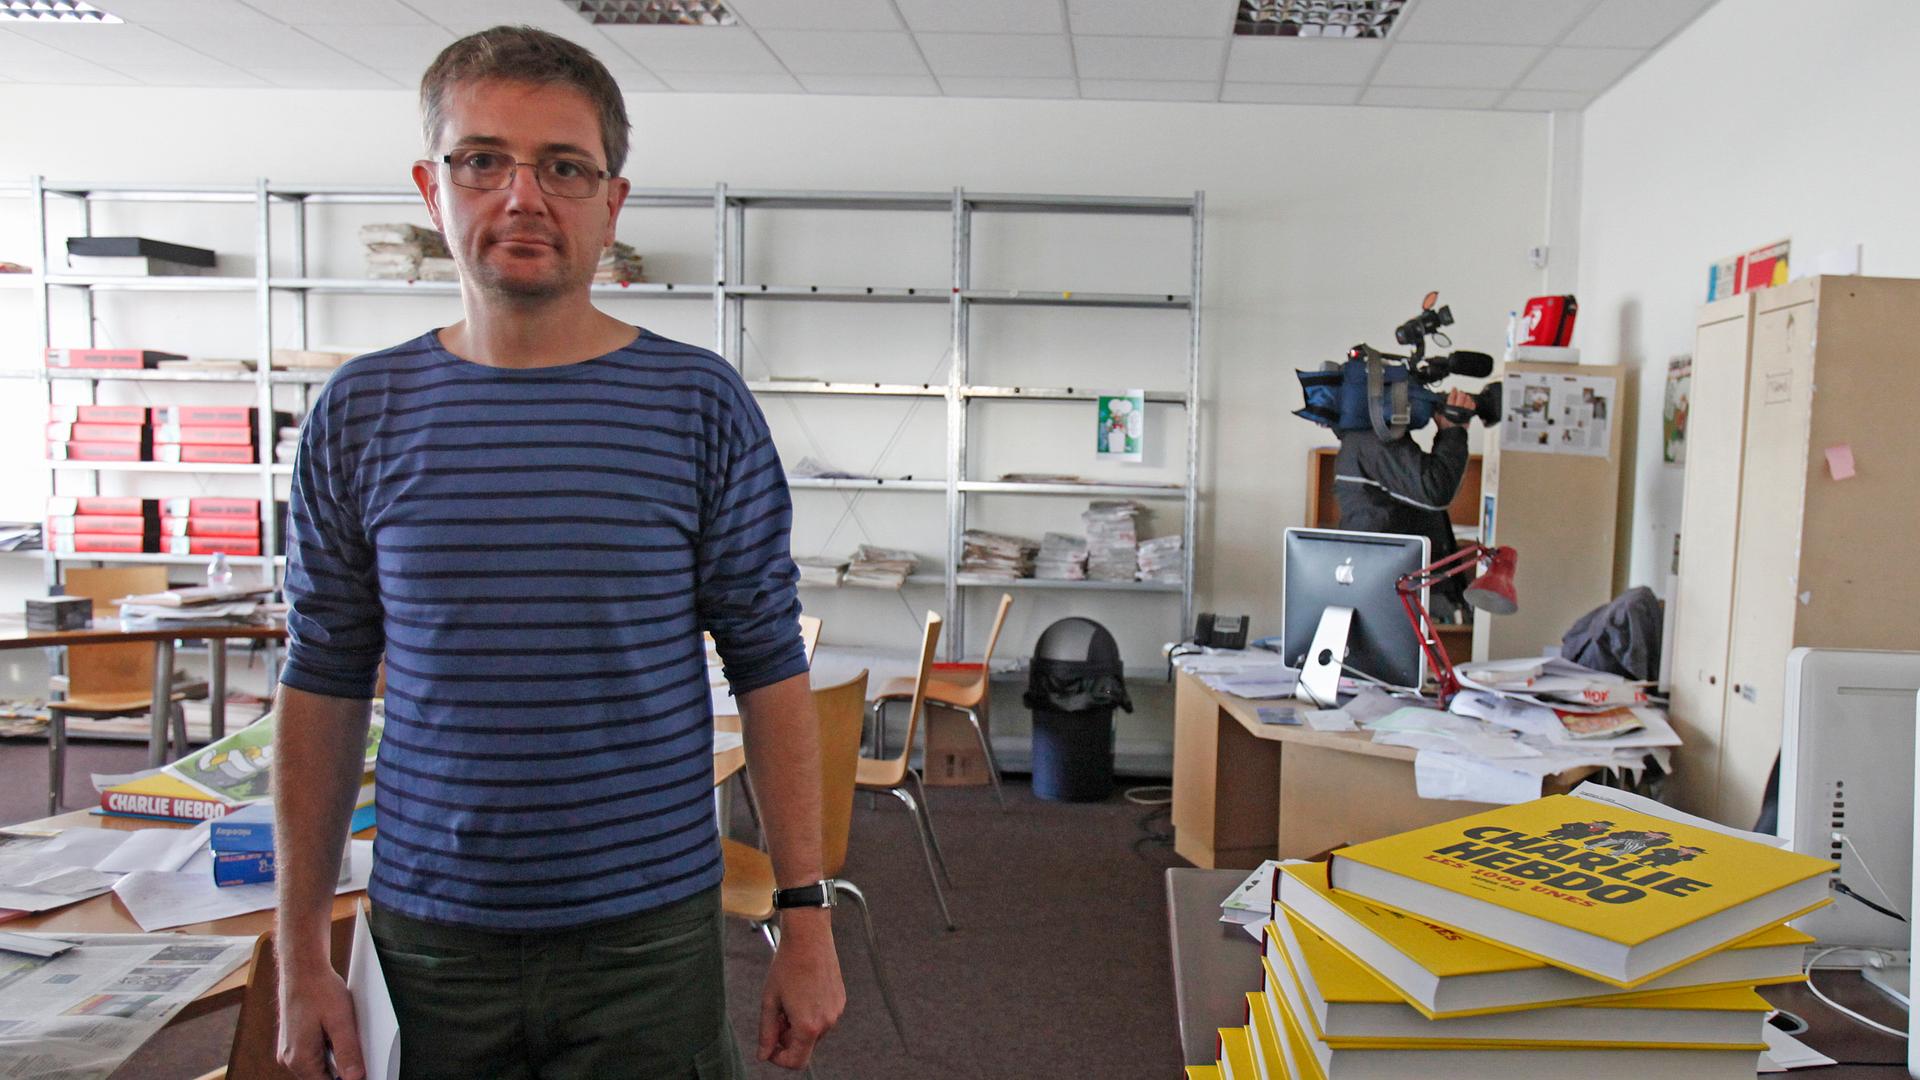 French cartoonist Charb, publishing director of French satirical weekly Charlie Hebdo, poses for photographs at their offices in Paris, September 19, 2012. Charlie Hebdo published cartoons of the Prophet Mohammad on Wednesday, a decision criticised by the